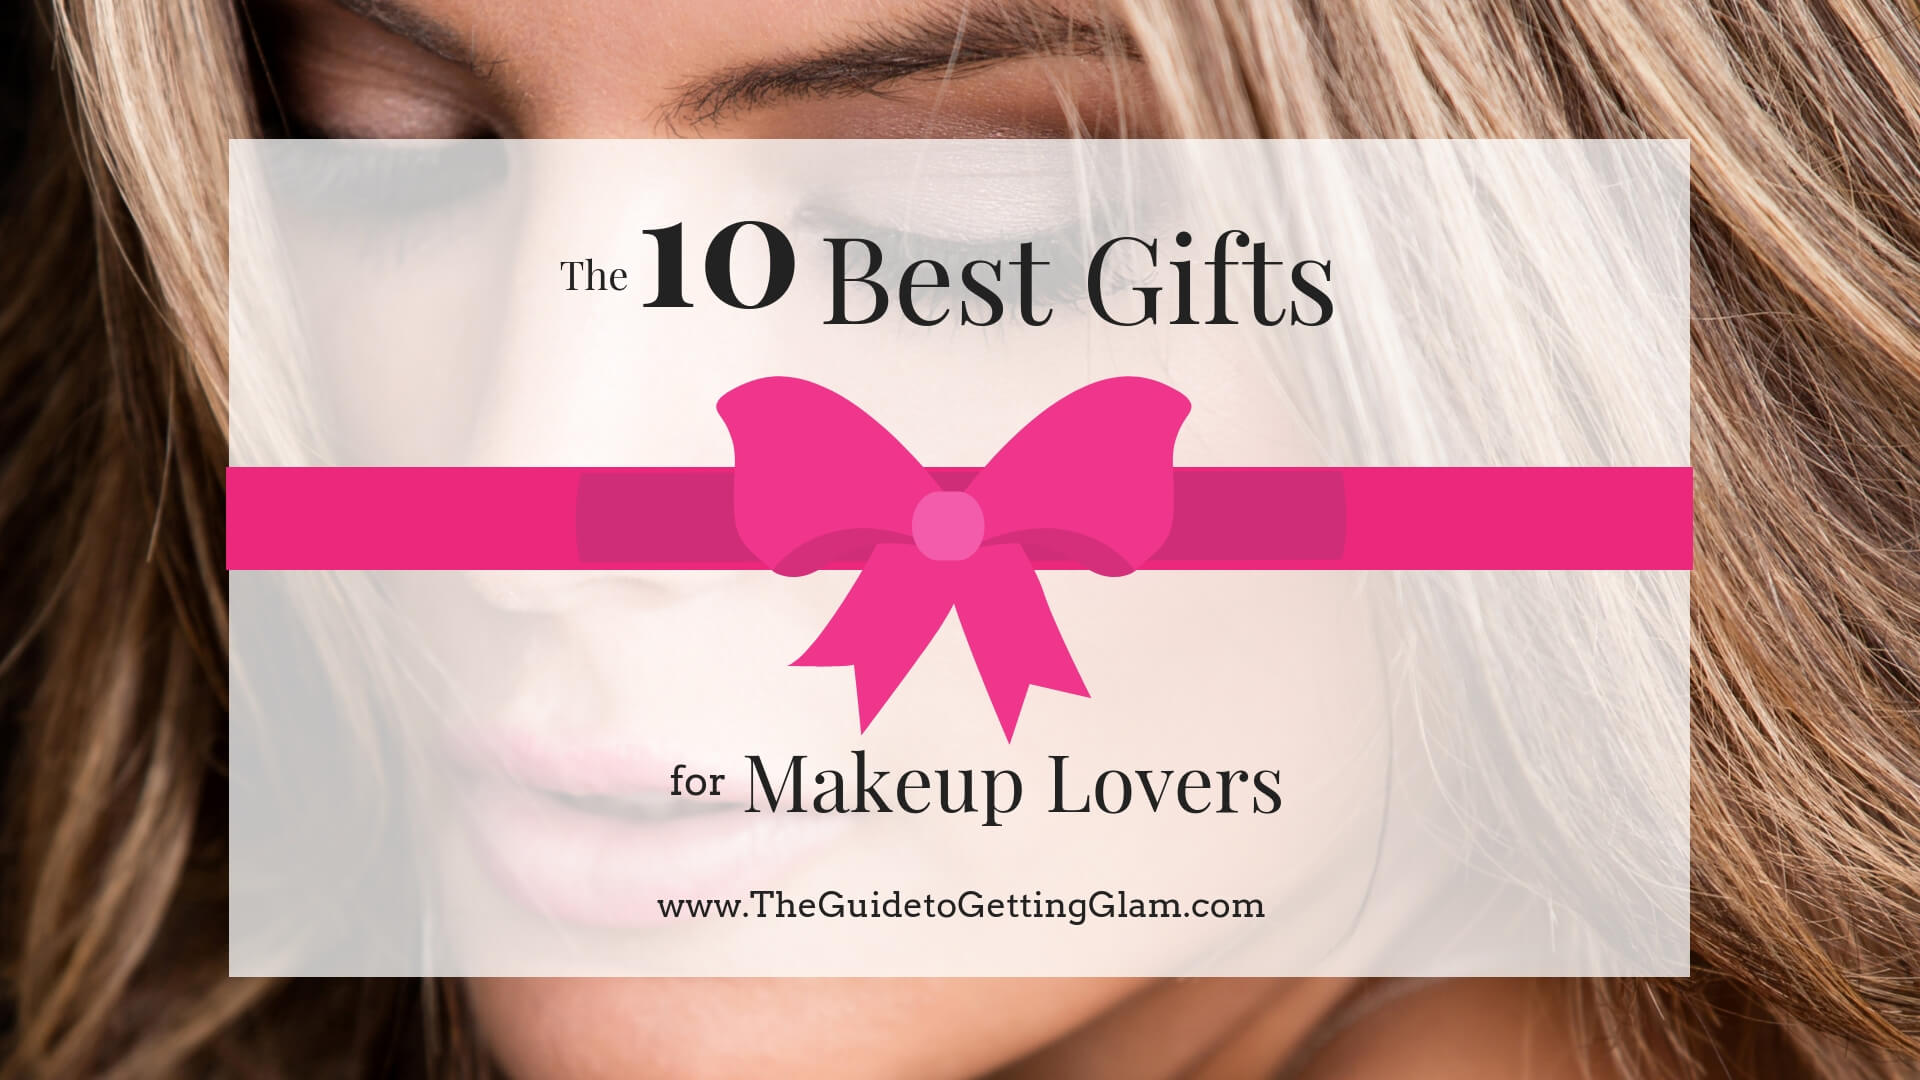 The 10 Best Gifts for Makeup Lovers